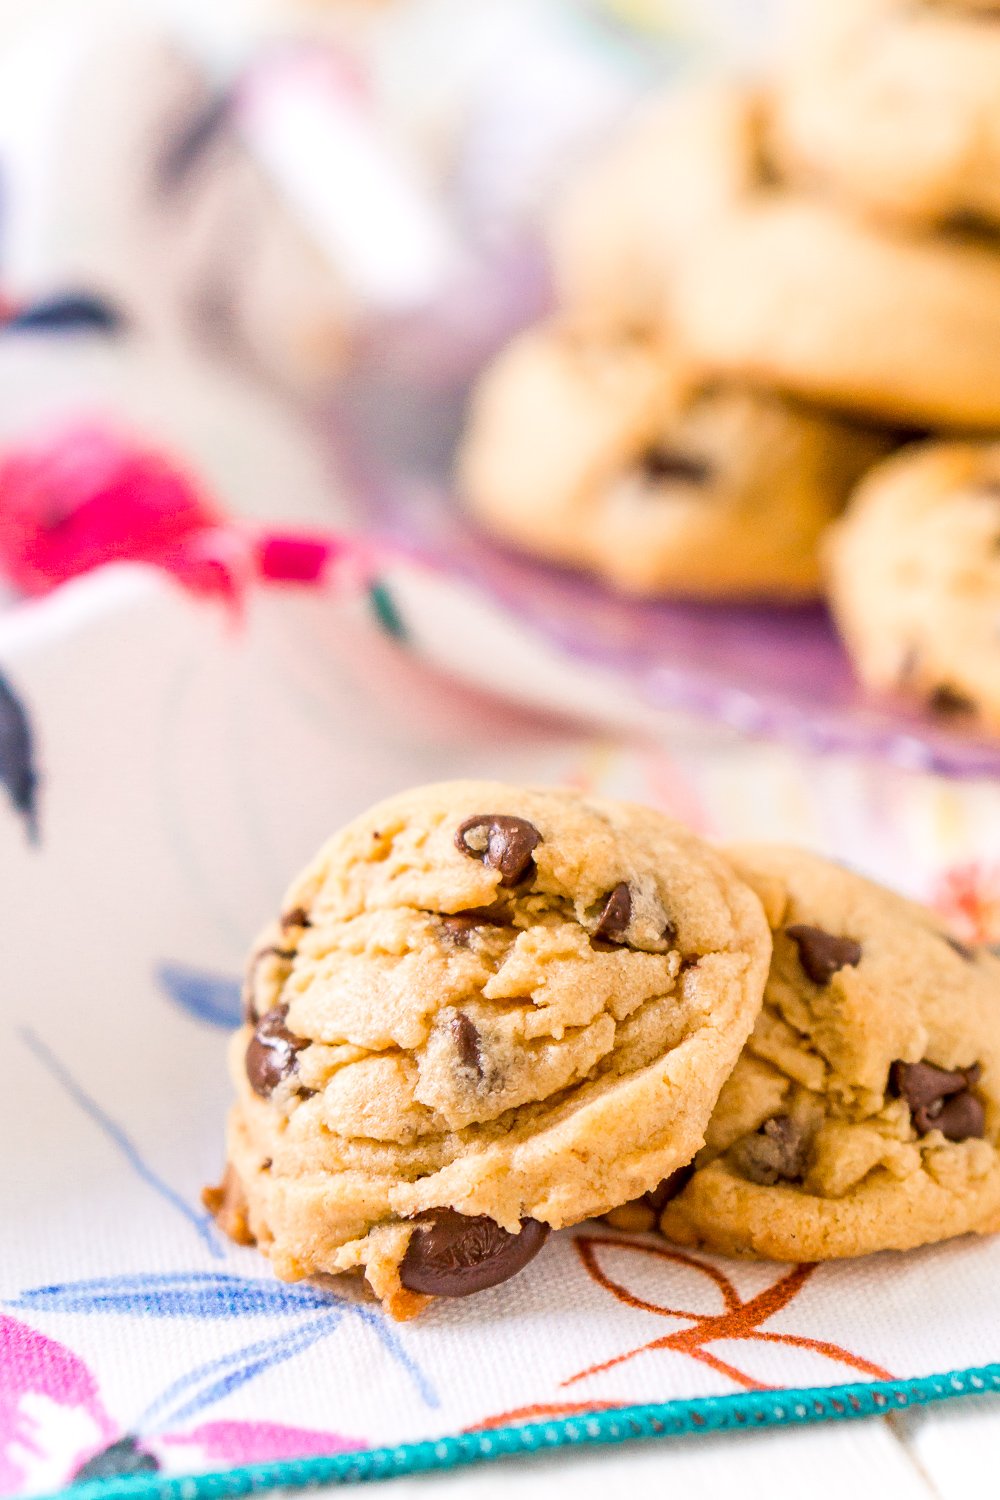 Two Peanut Butter Chocolate Chip Cookies on a floral napkin.